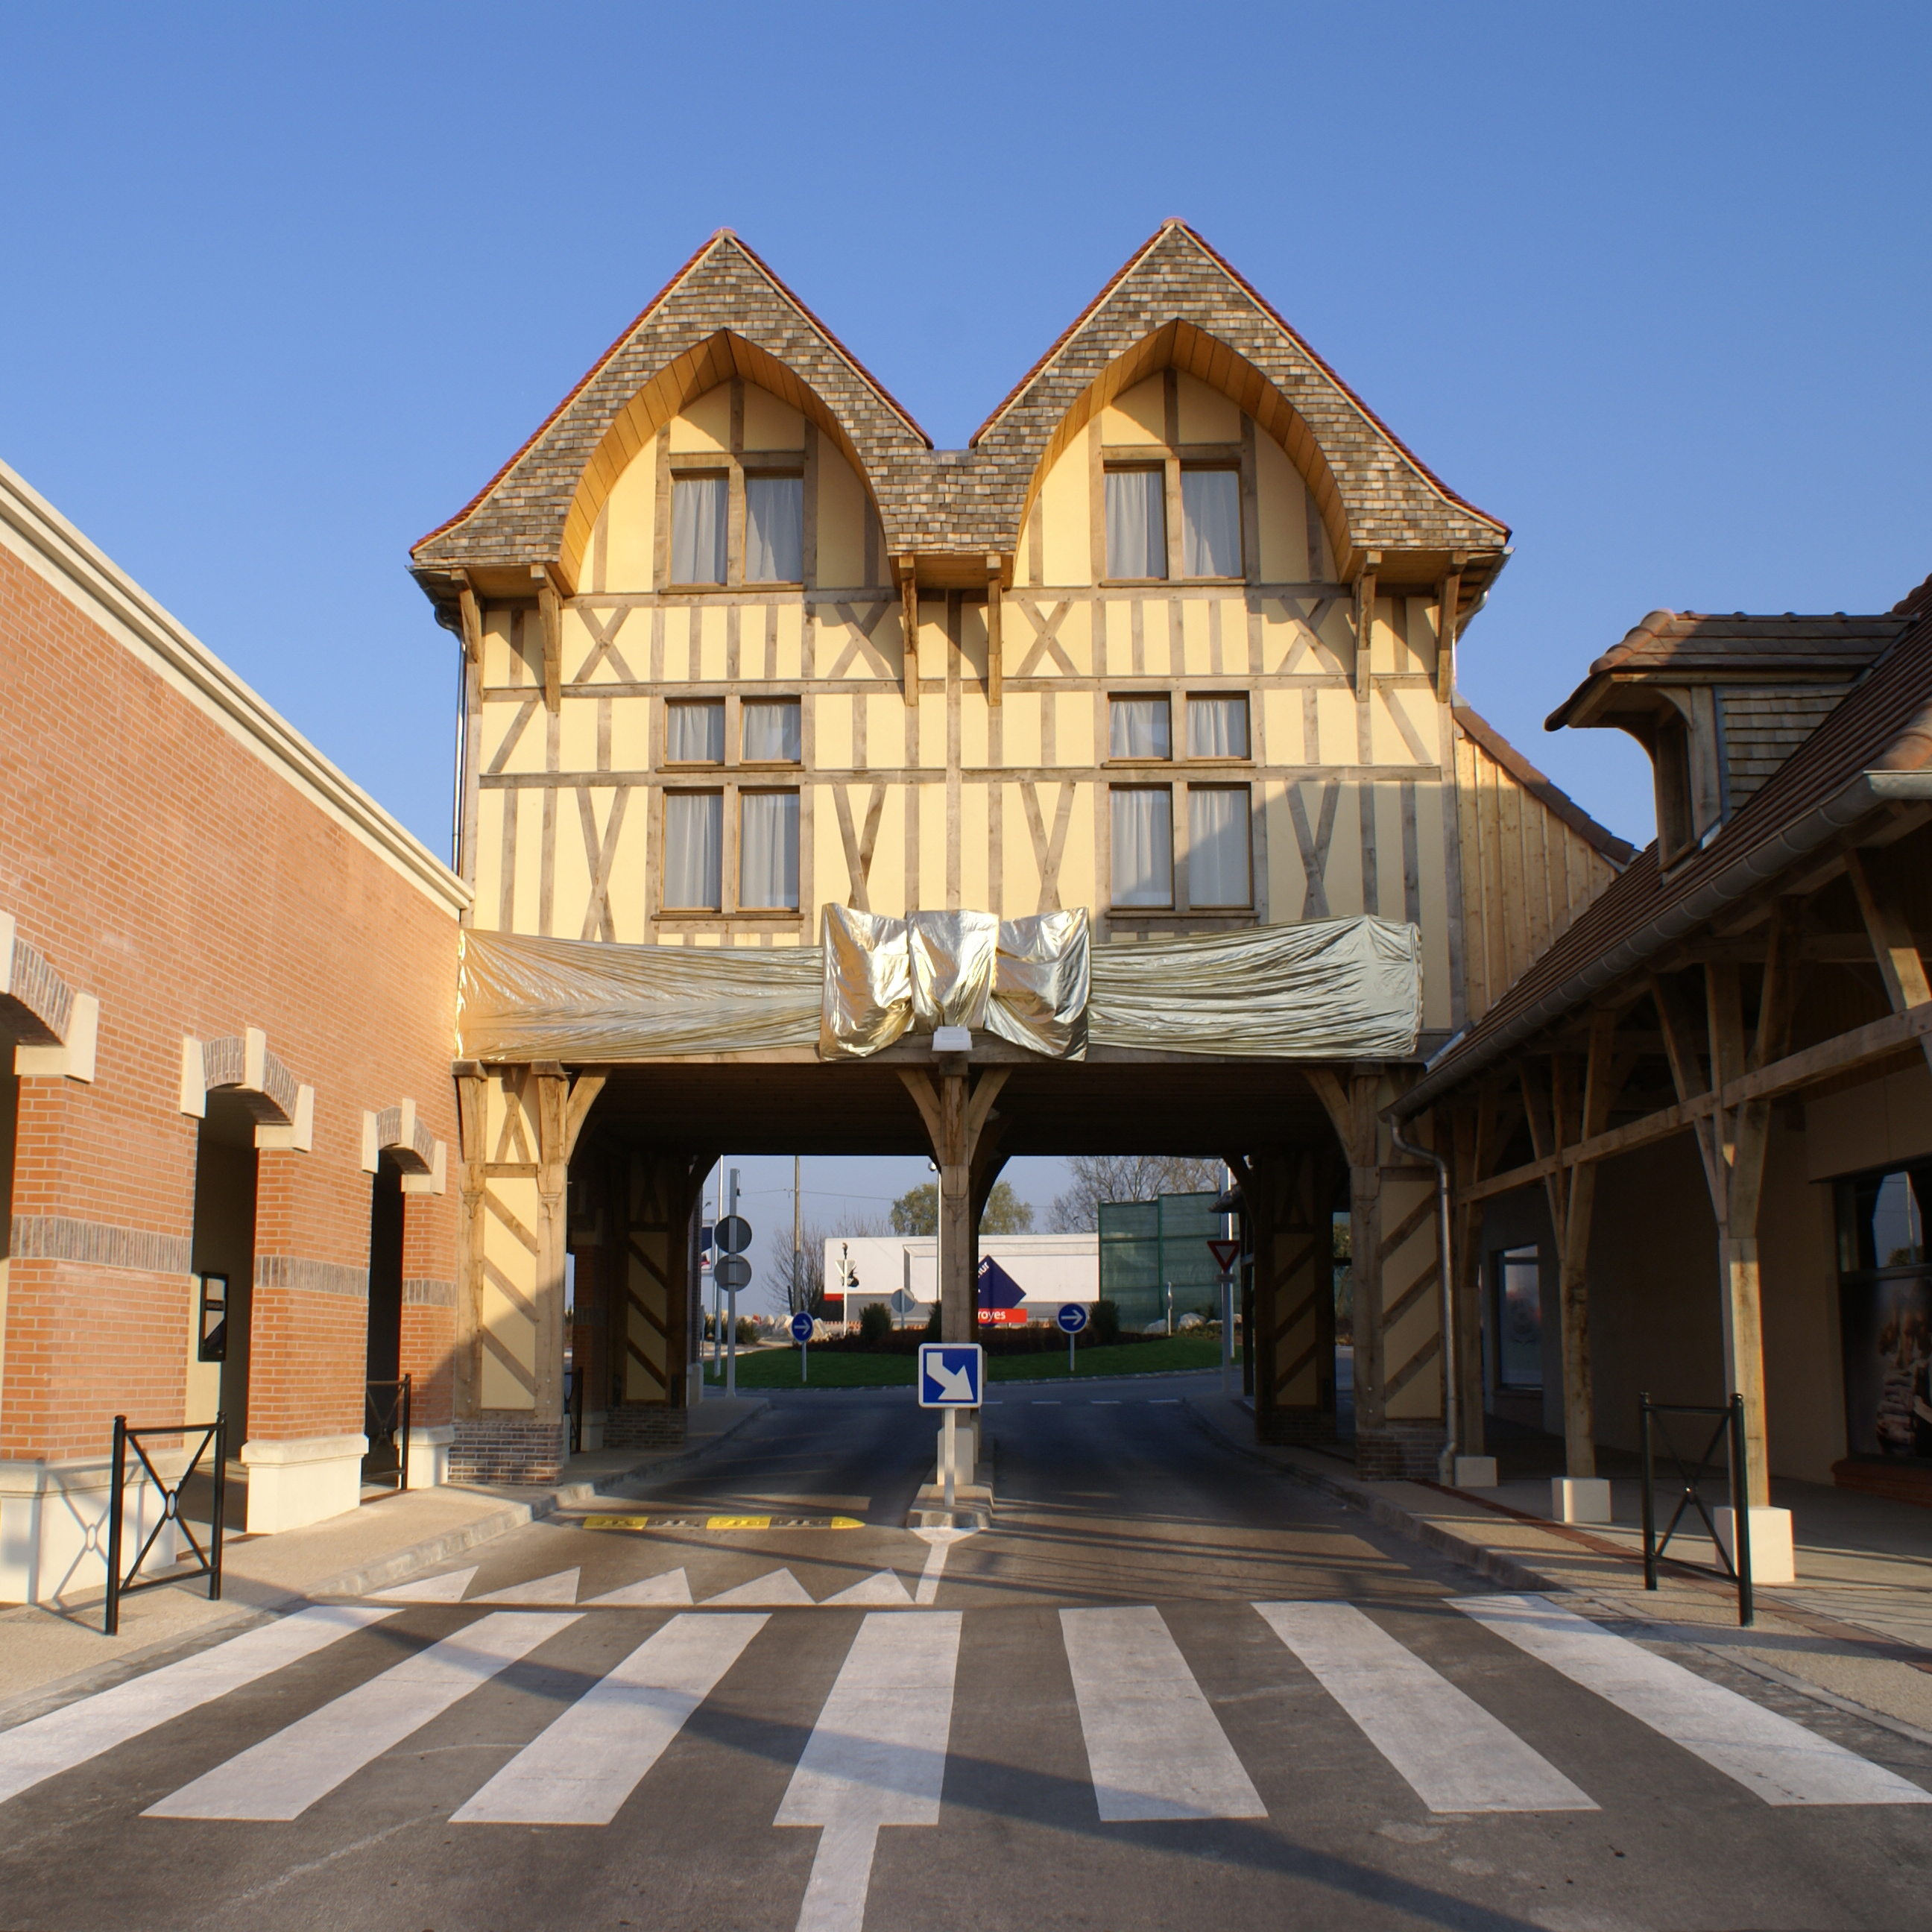 Factory Outlet Center, Troyes